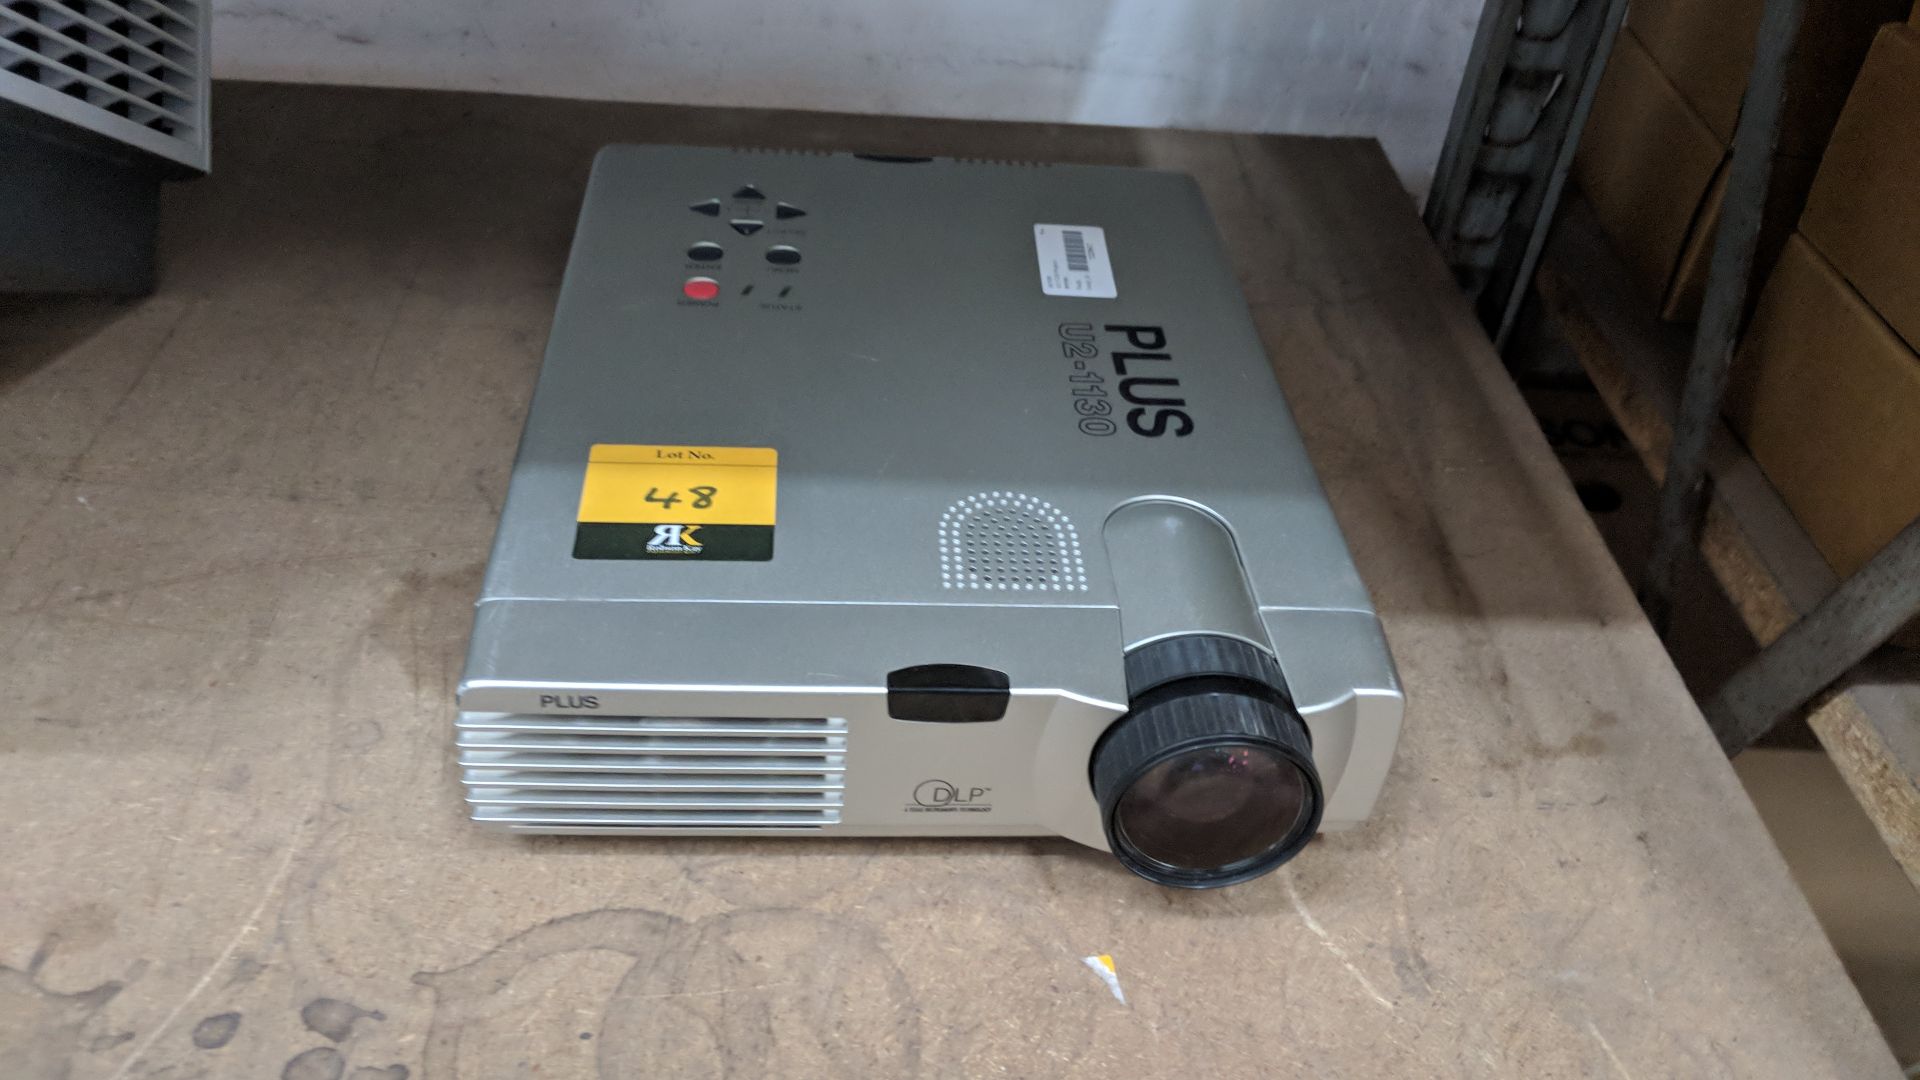 PLUS model U2-1130 DLP projector IMPORTANT: Please remember goods successfully bid upon must be paid - Image 2 of 4